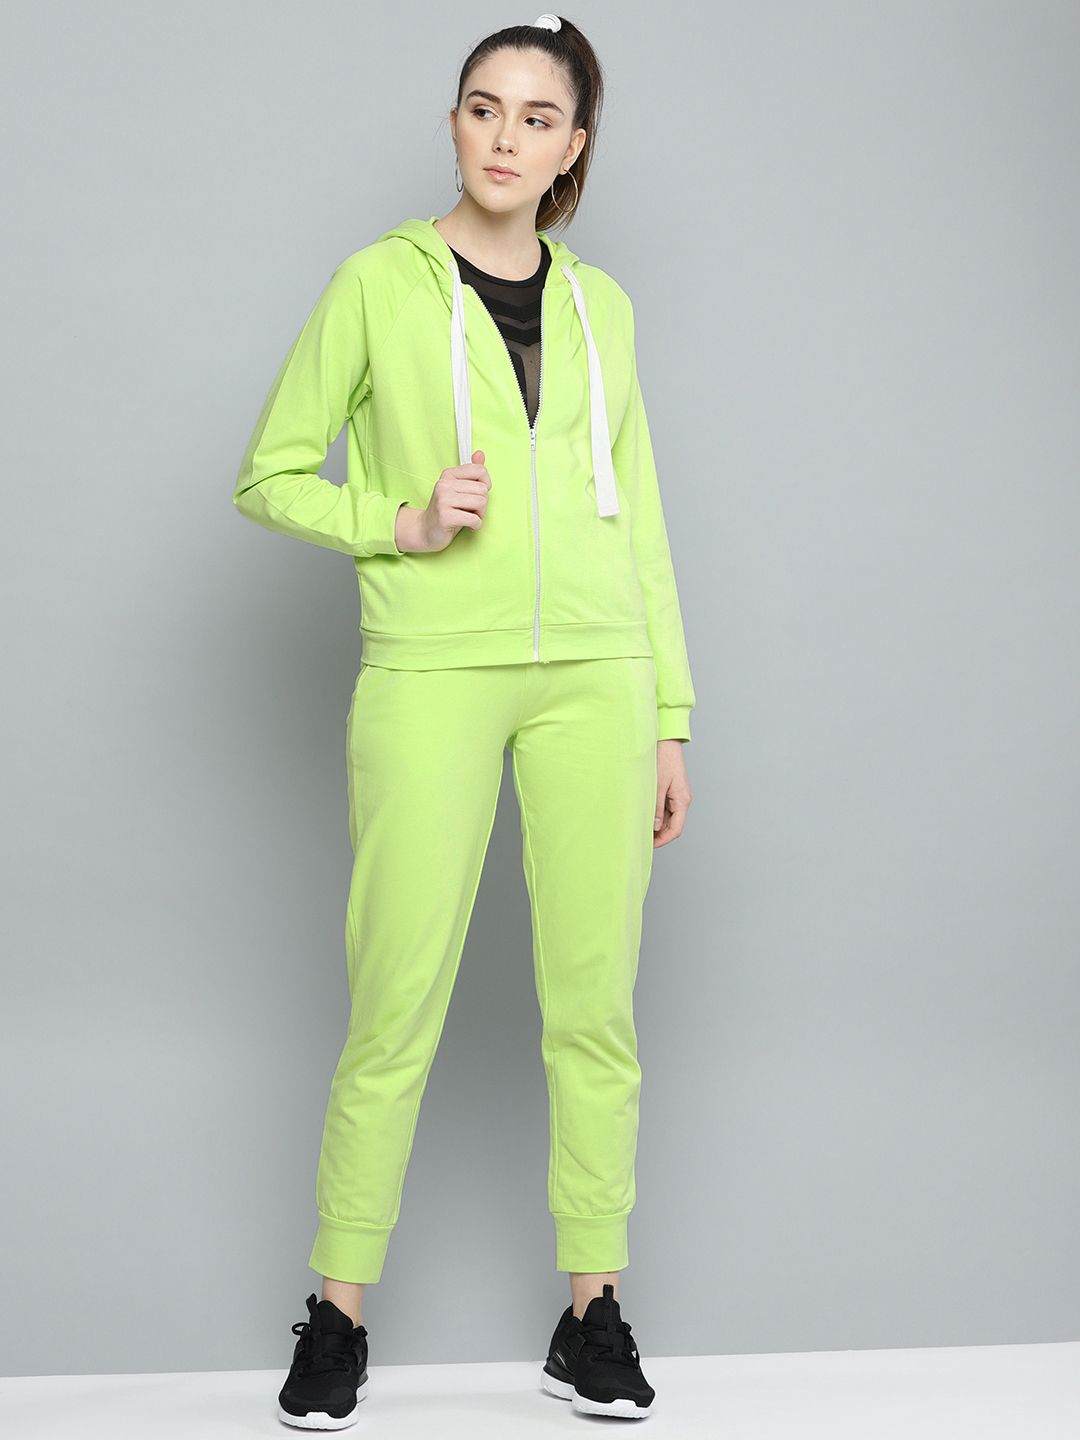 Besiva Women Fluoroscent Green Solid Track Suit Price in India